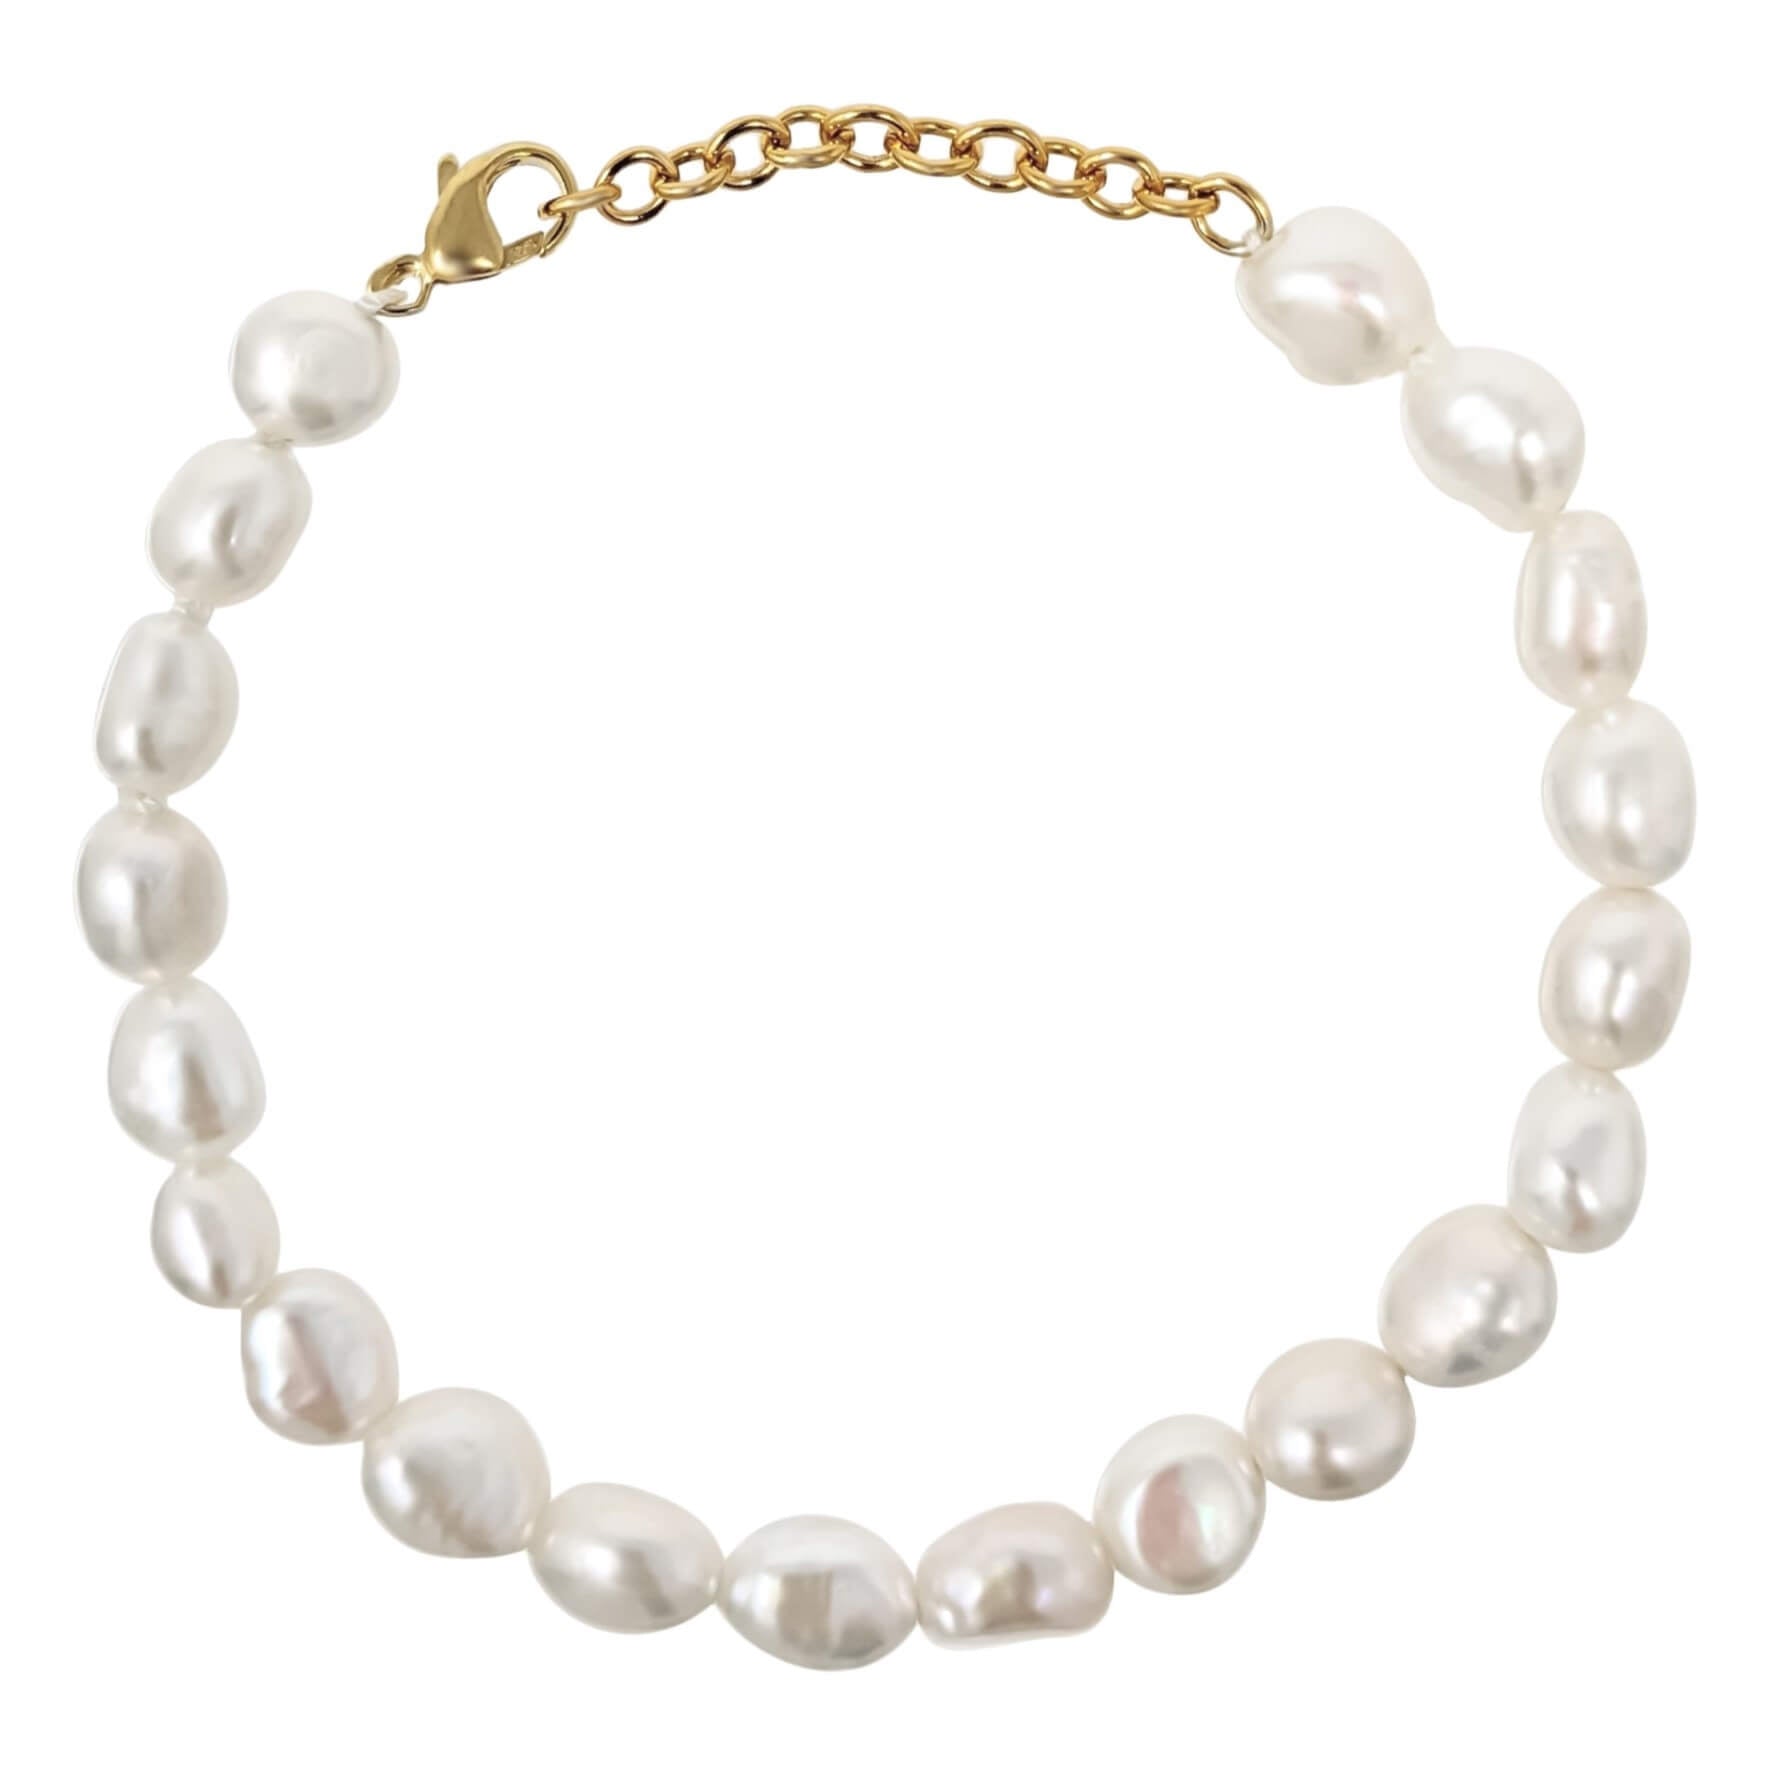 Small baroque pearl adjustable gold filled bracelet on white background